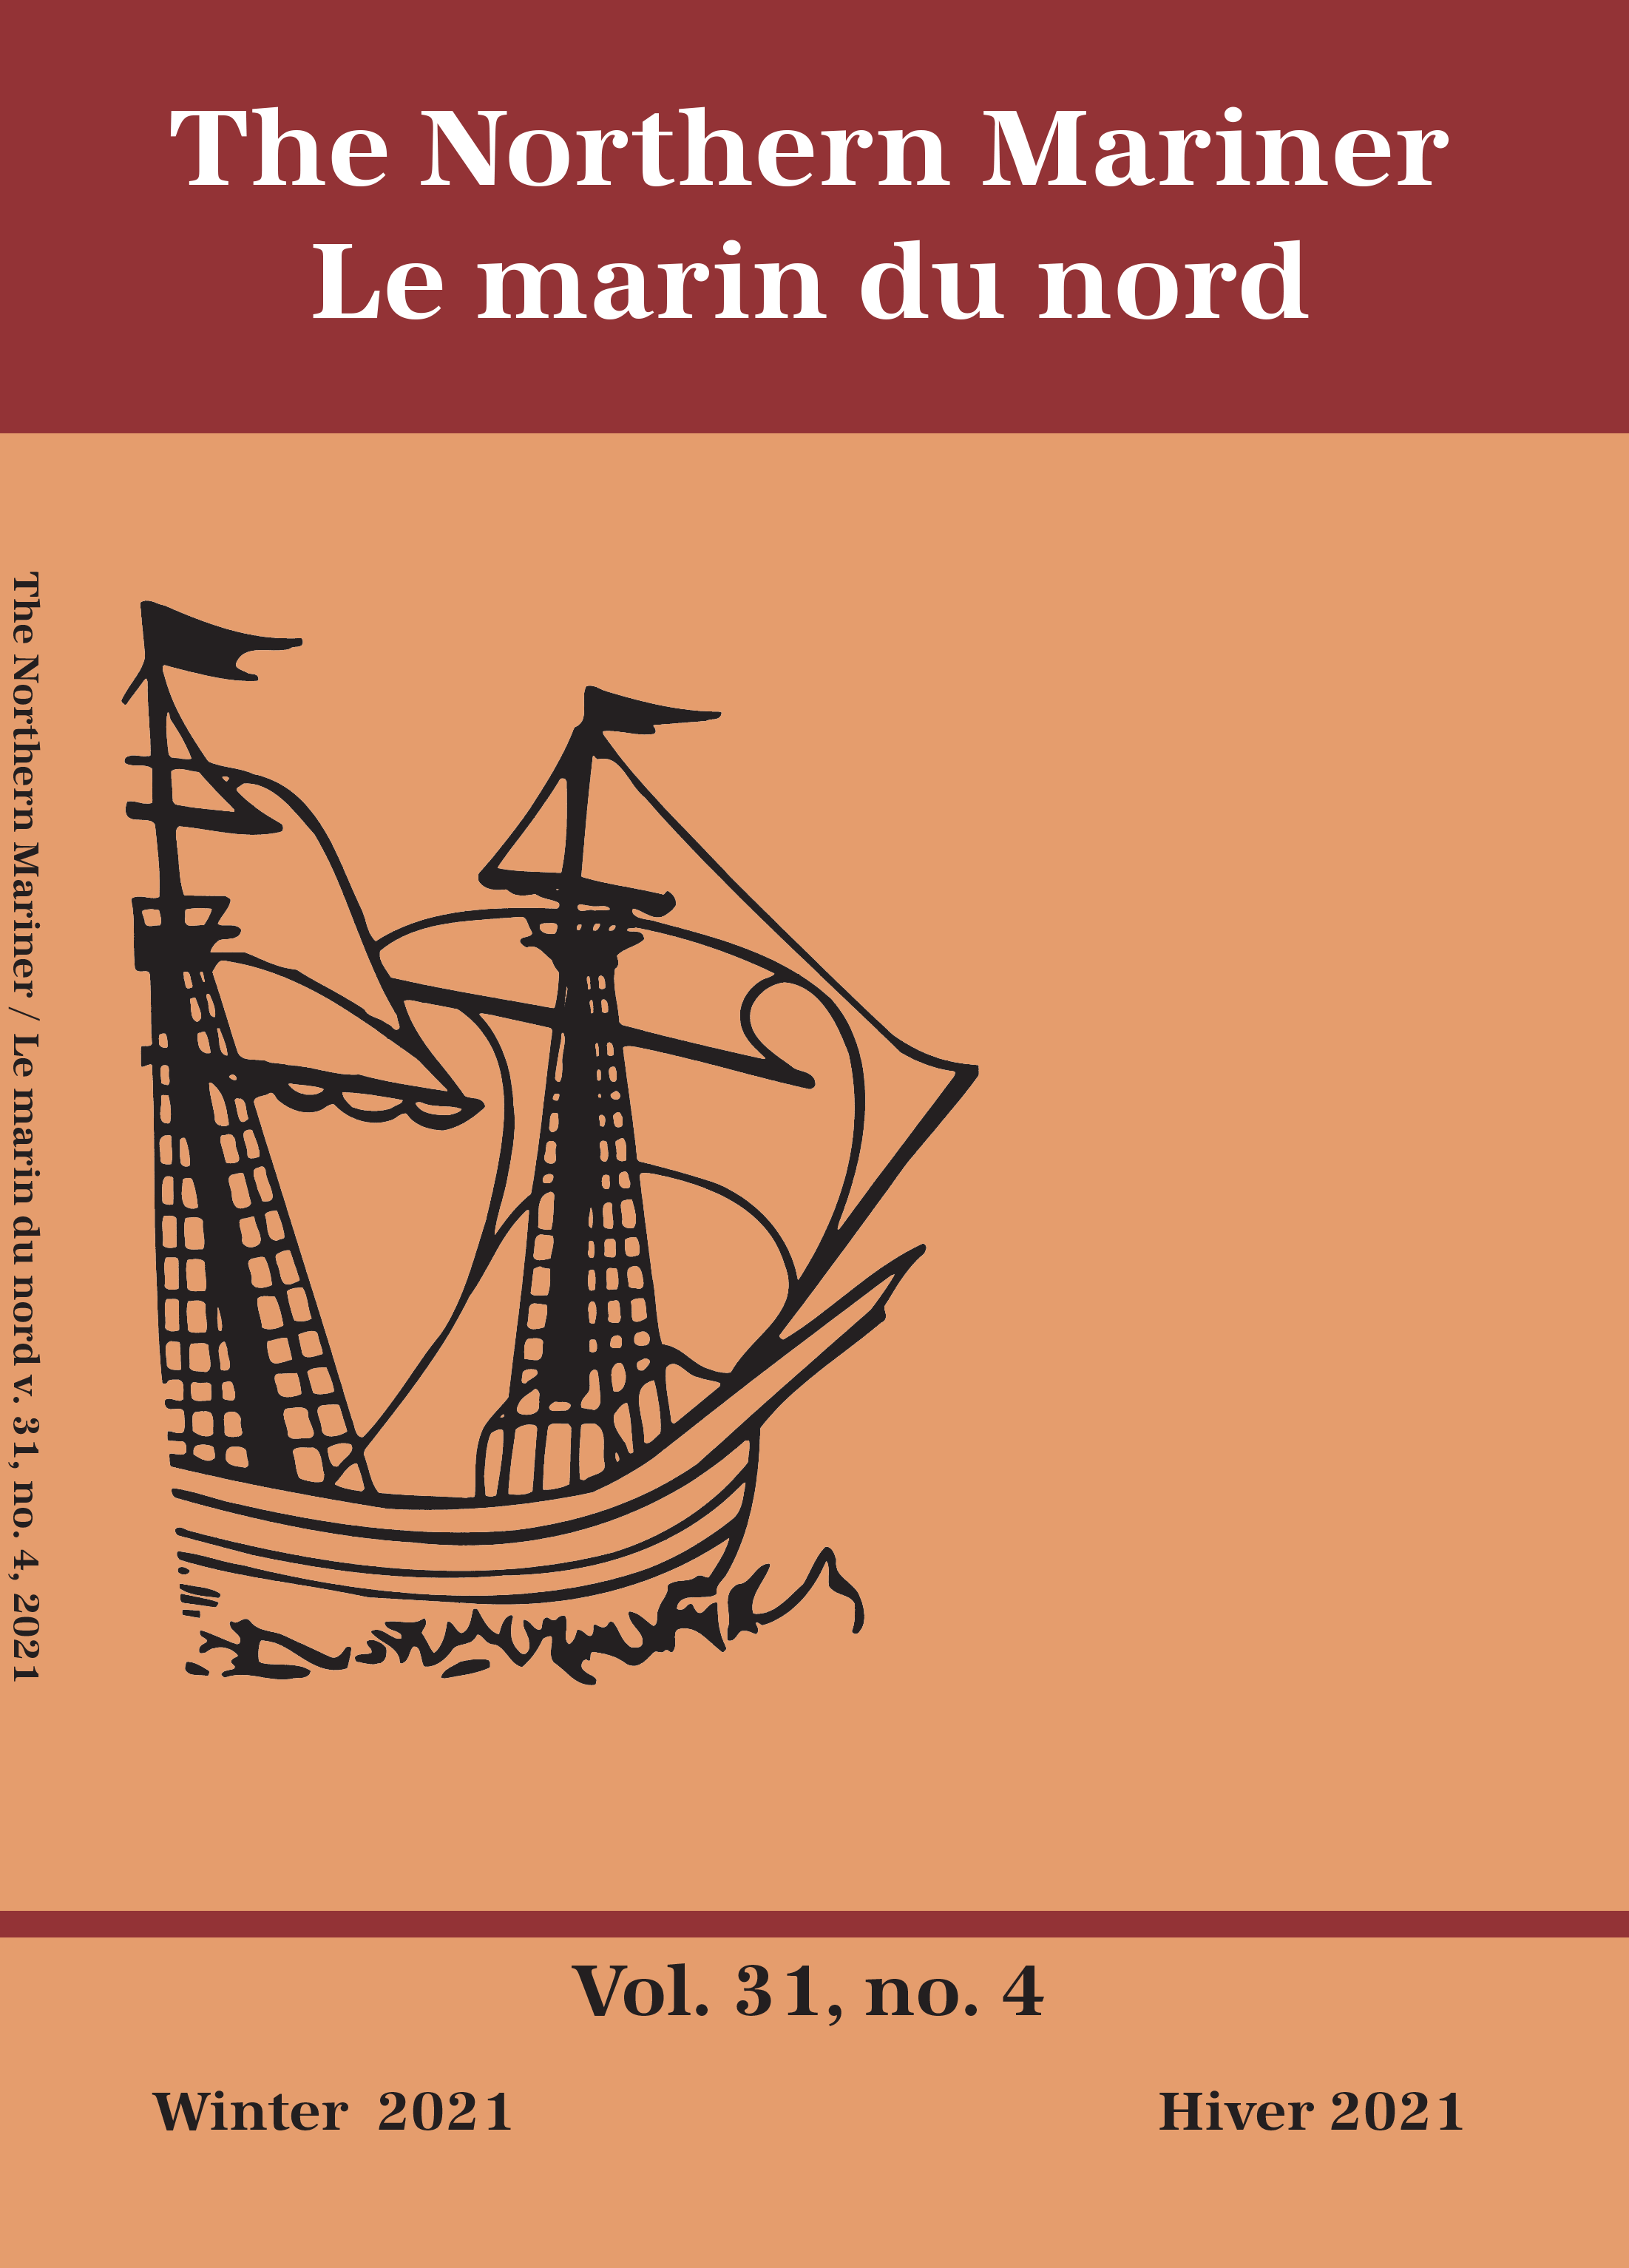 The image depicts the current cover of The Northern Mariner. It includes the journal's title and an illustration of the San Juan, the Basque whaling ship from 1565 that Parks Canada excavated in Red Bay, Labrador.